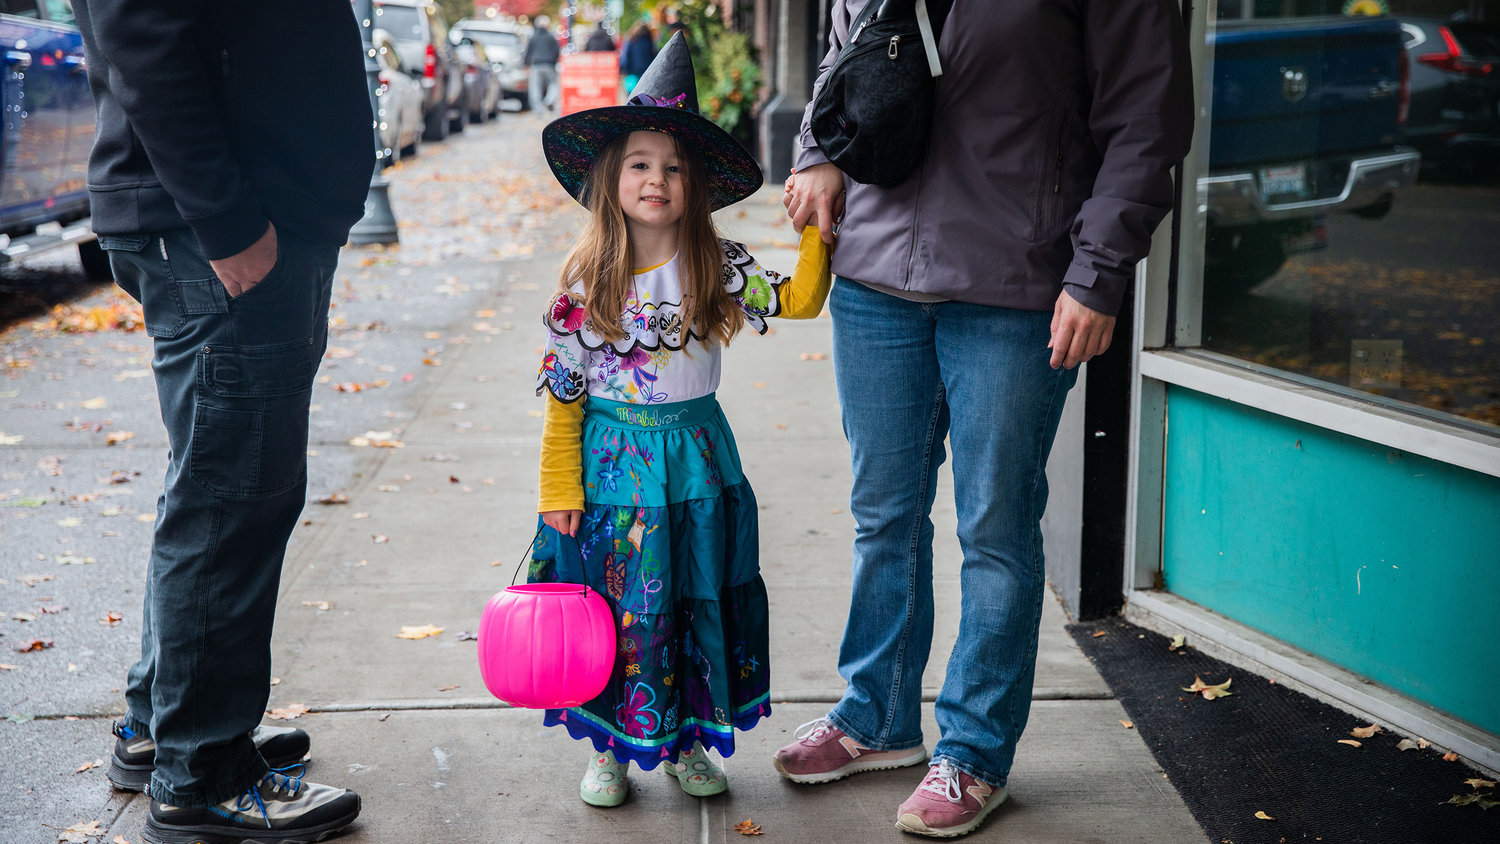 Ellie Hynes, 4, walks with her parents John and Katie while trick-or-treating in downtown Centralia on Halloween.